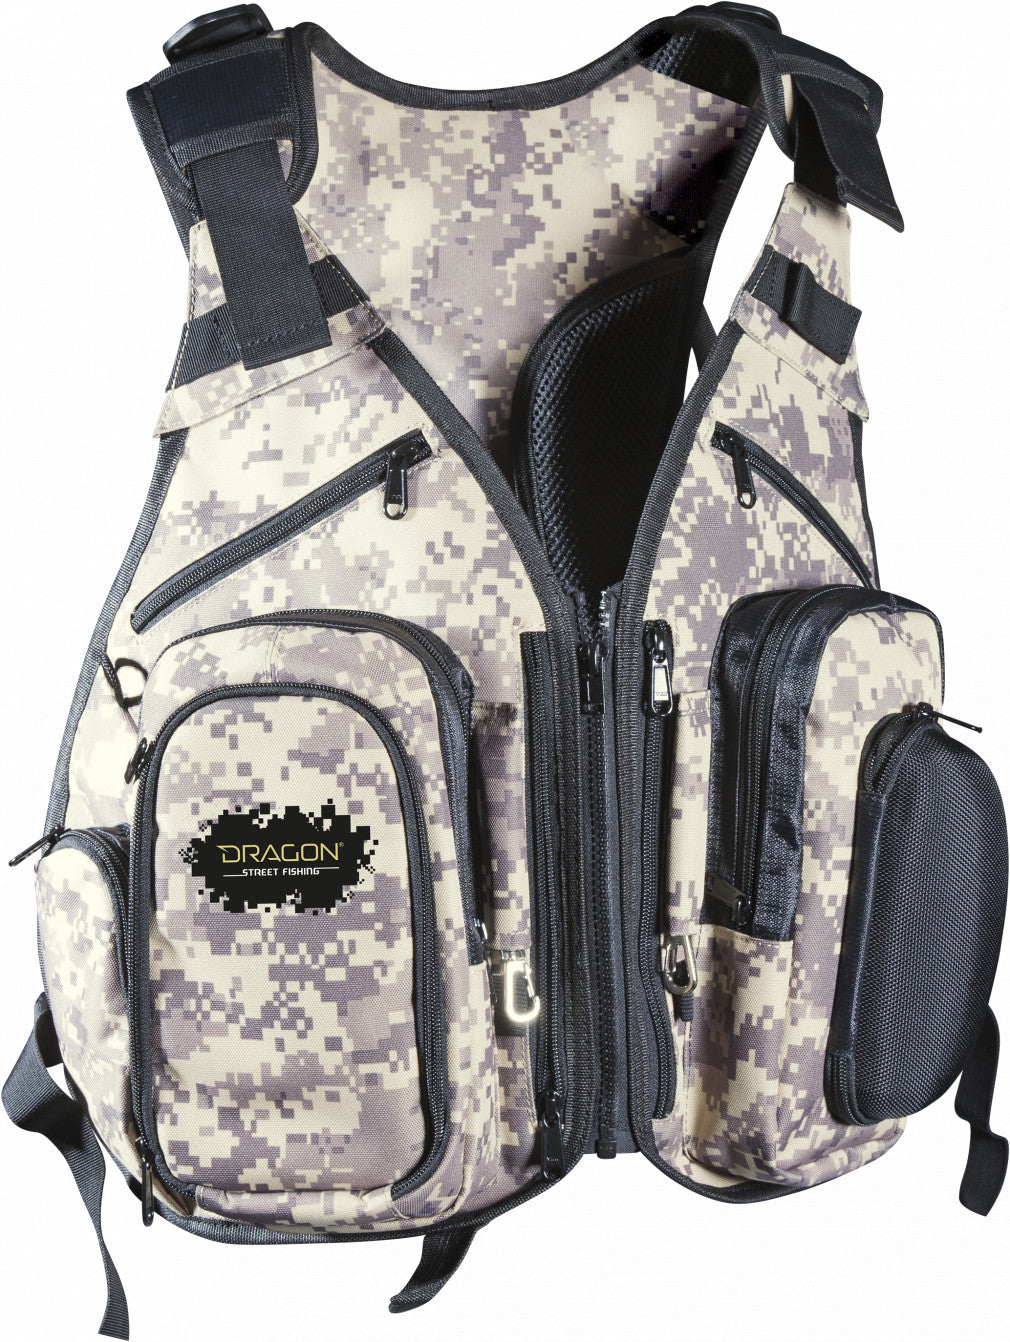 Dragon Street Fishing Technical Vest - Tech Pack with exchangeable bags . Fishing wear